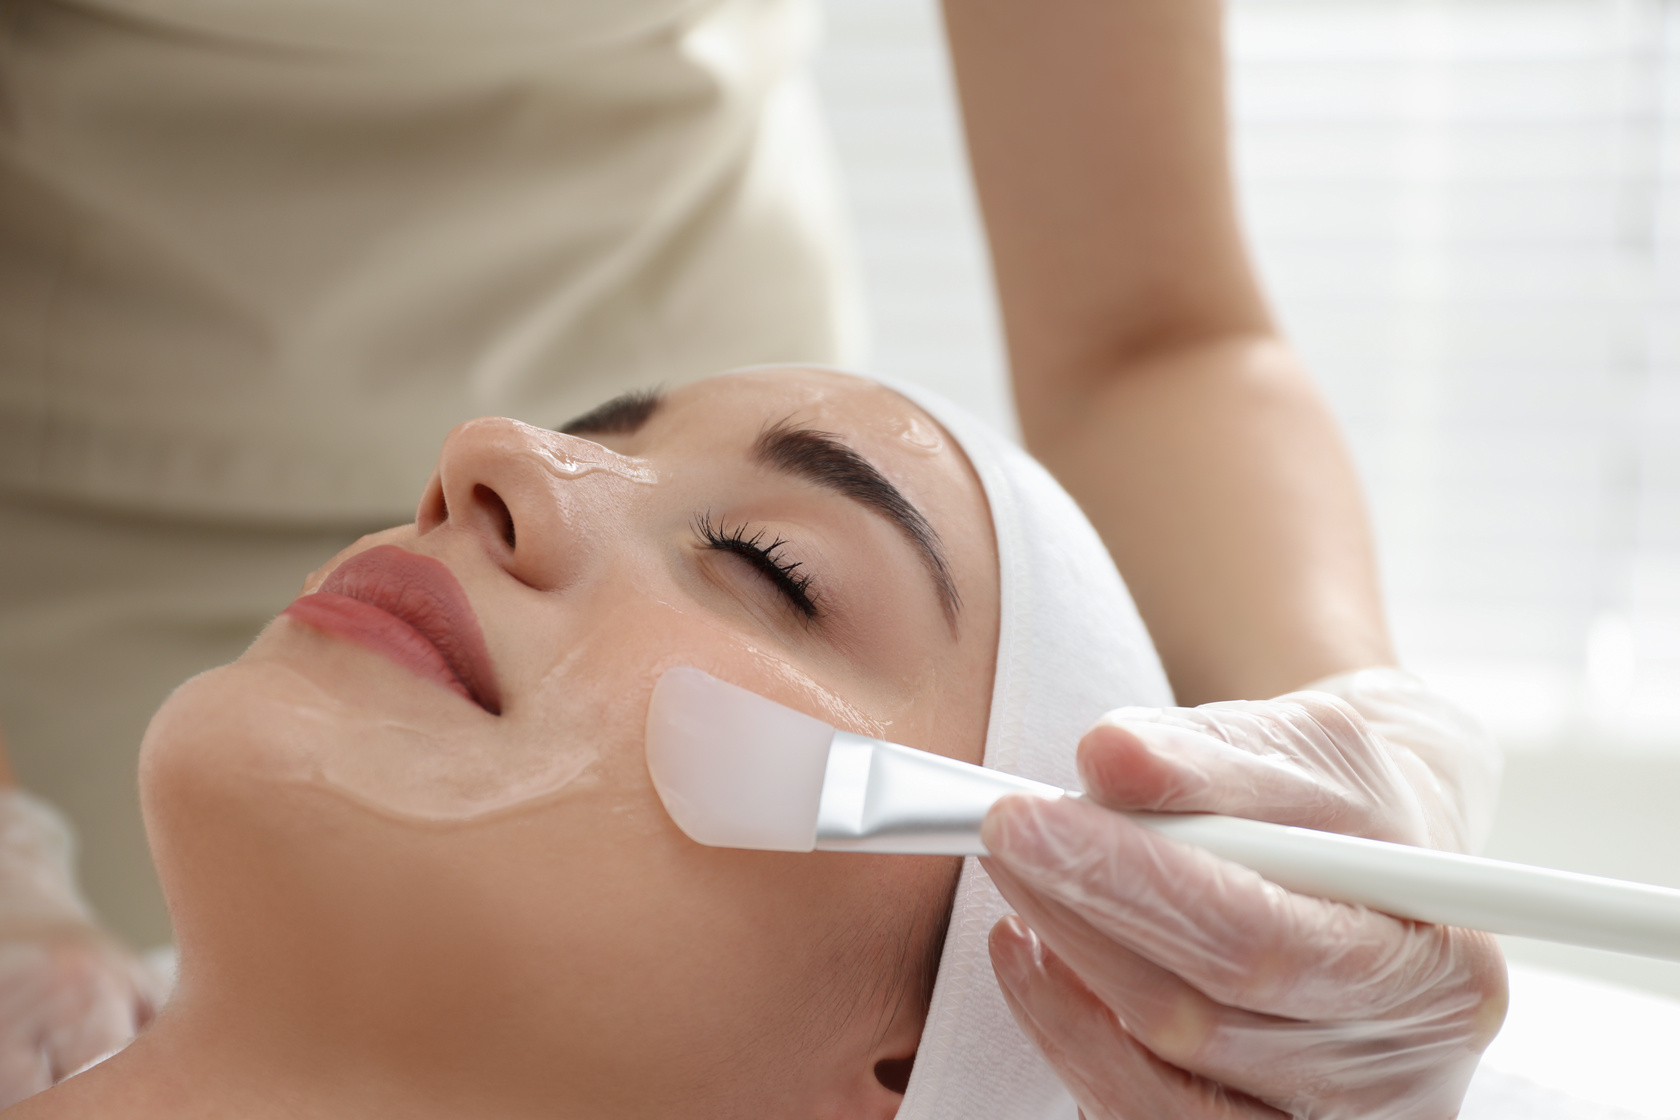 Young woman during face chemical peeling procedure in salon